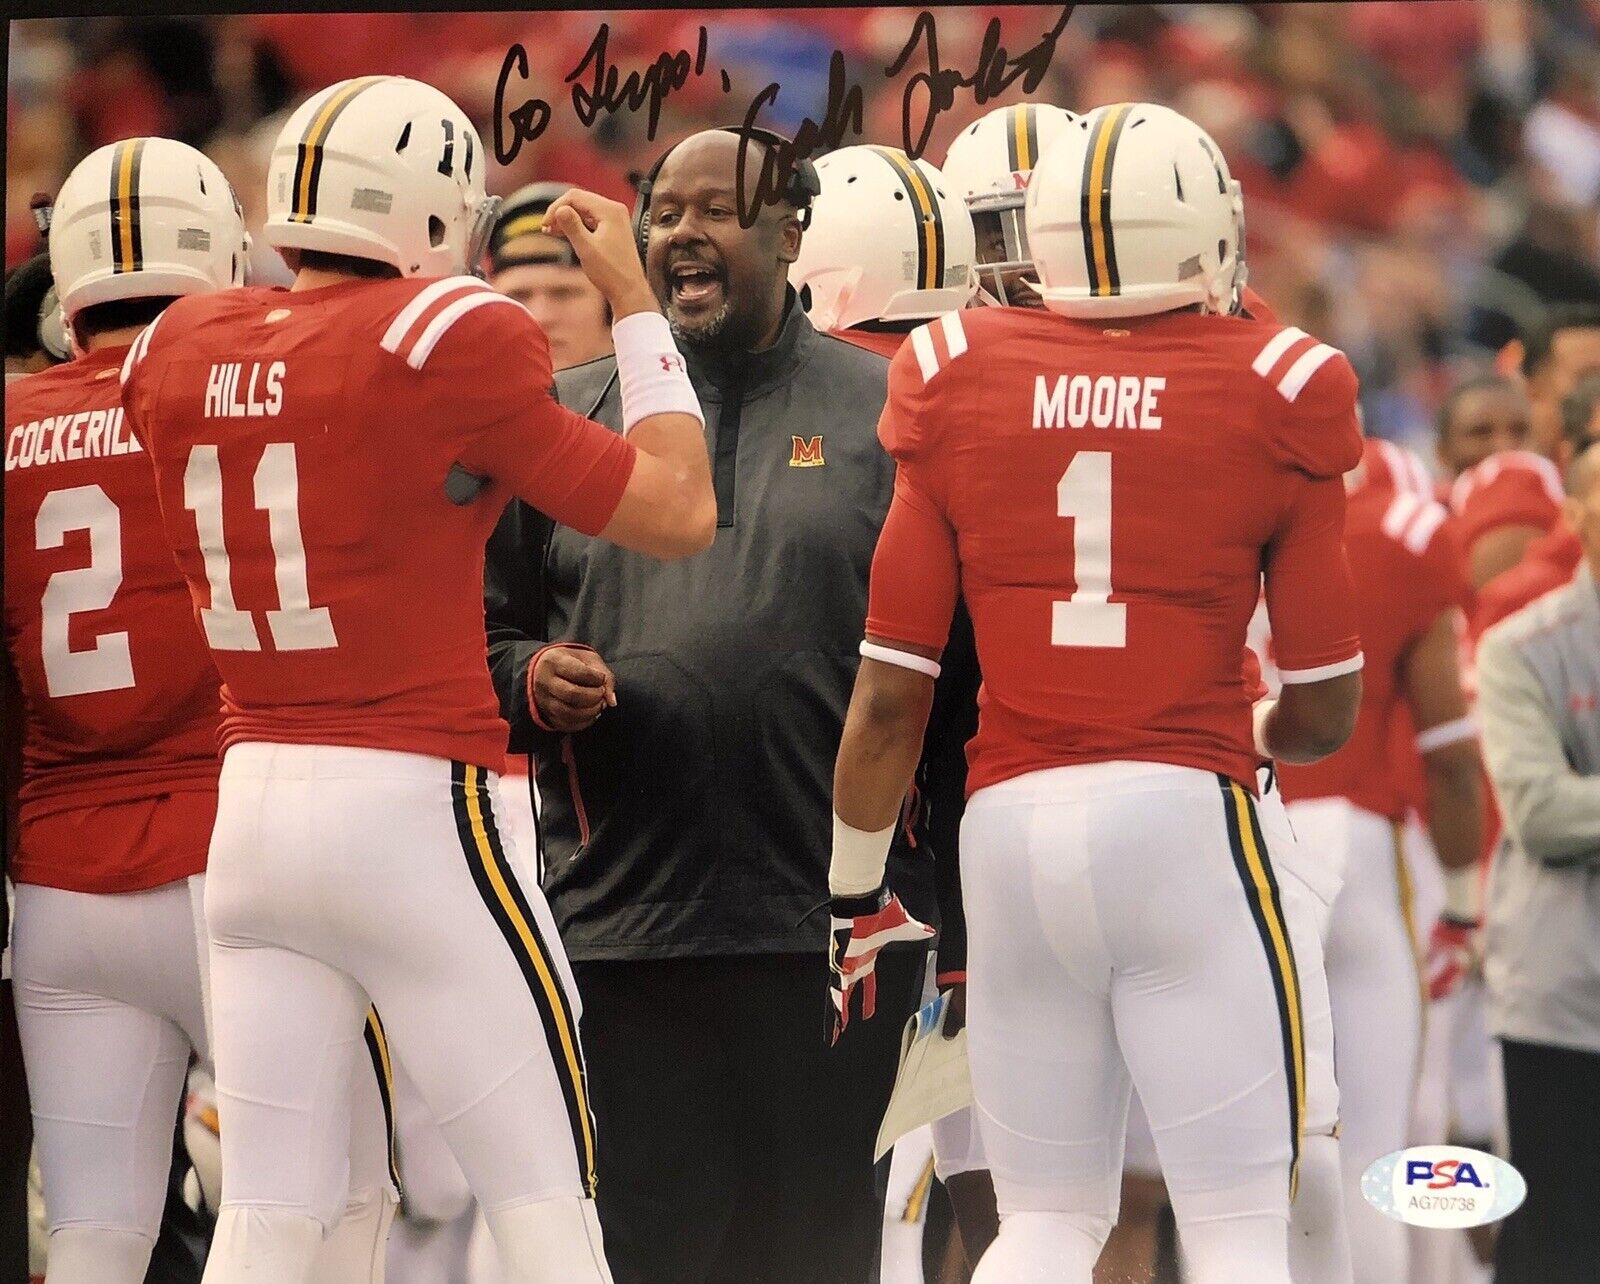 Mike Locksley Signed Autographed Maryland Terrapins 8x10 Photo Poster painting Big Ten Psa/Dna